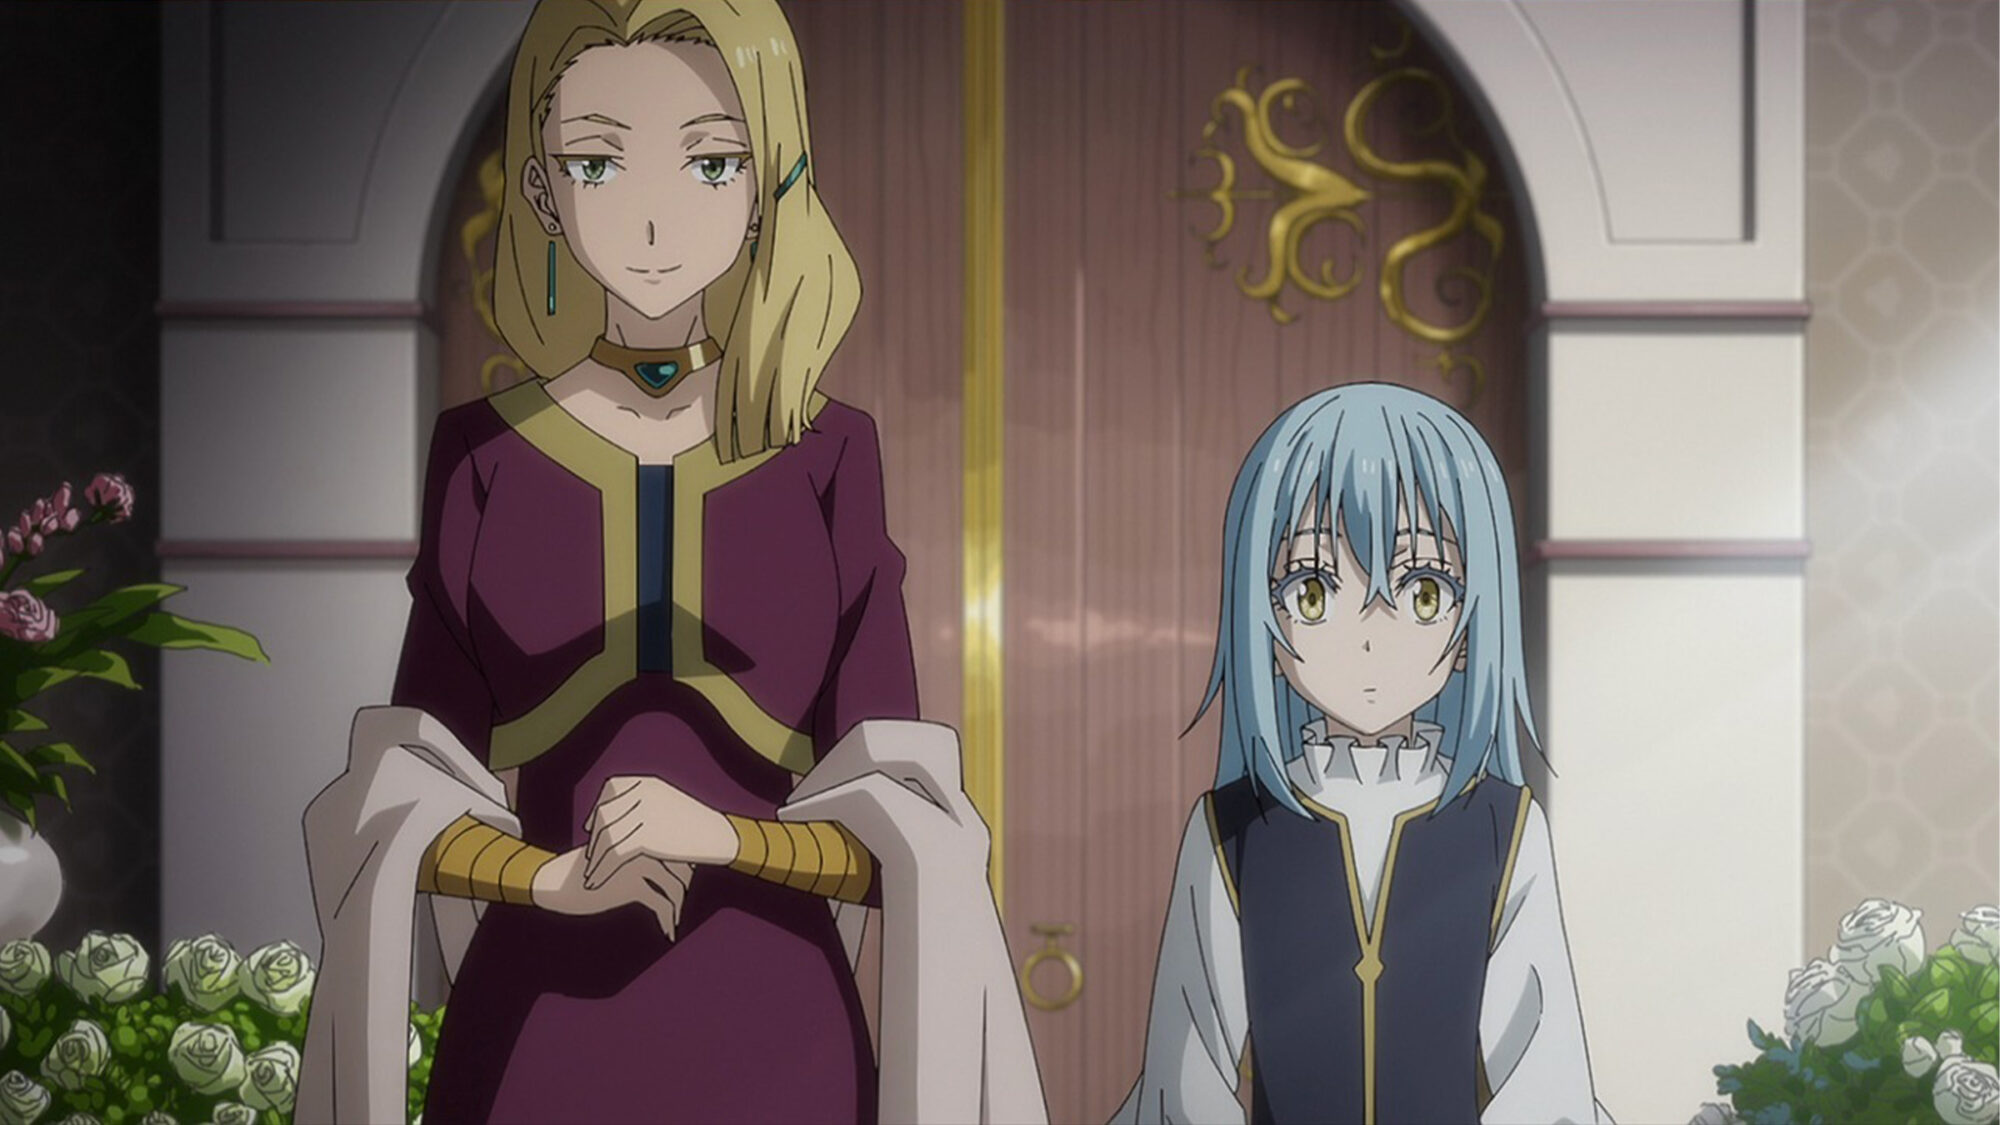 That Time I Got Reincarnated as a Slime: Coleus' Dream - Official